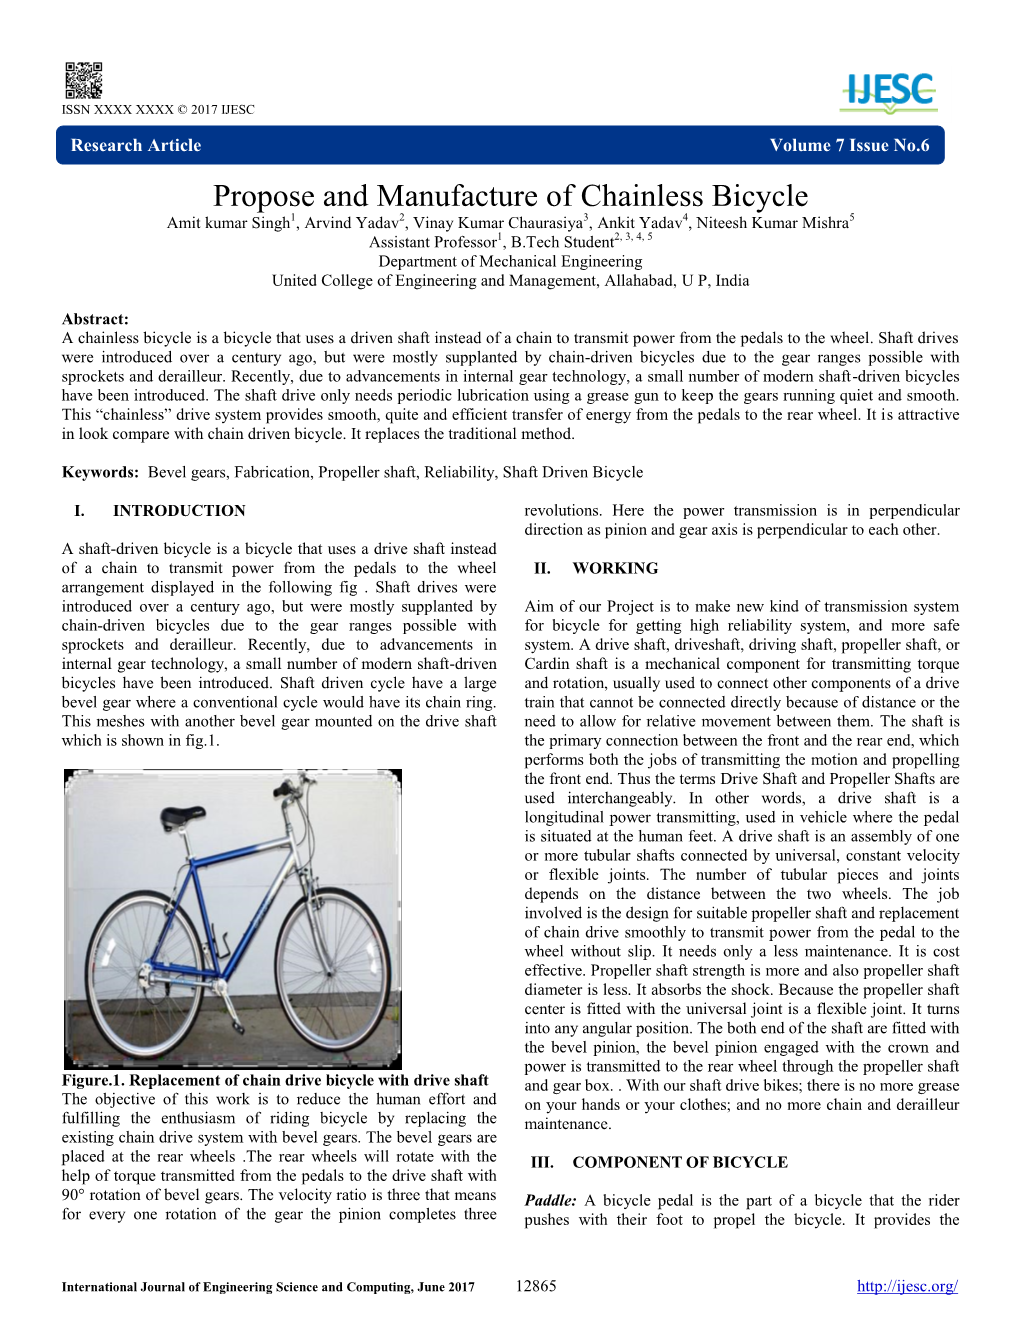 Propose and Manufacture of Chainless Bicycle